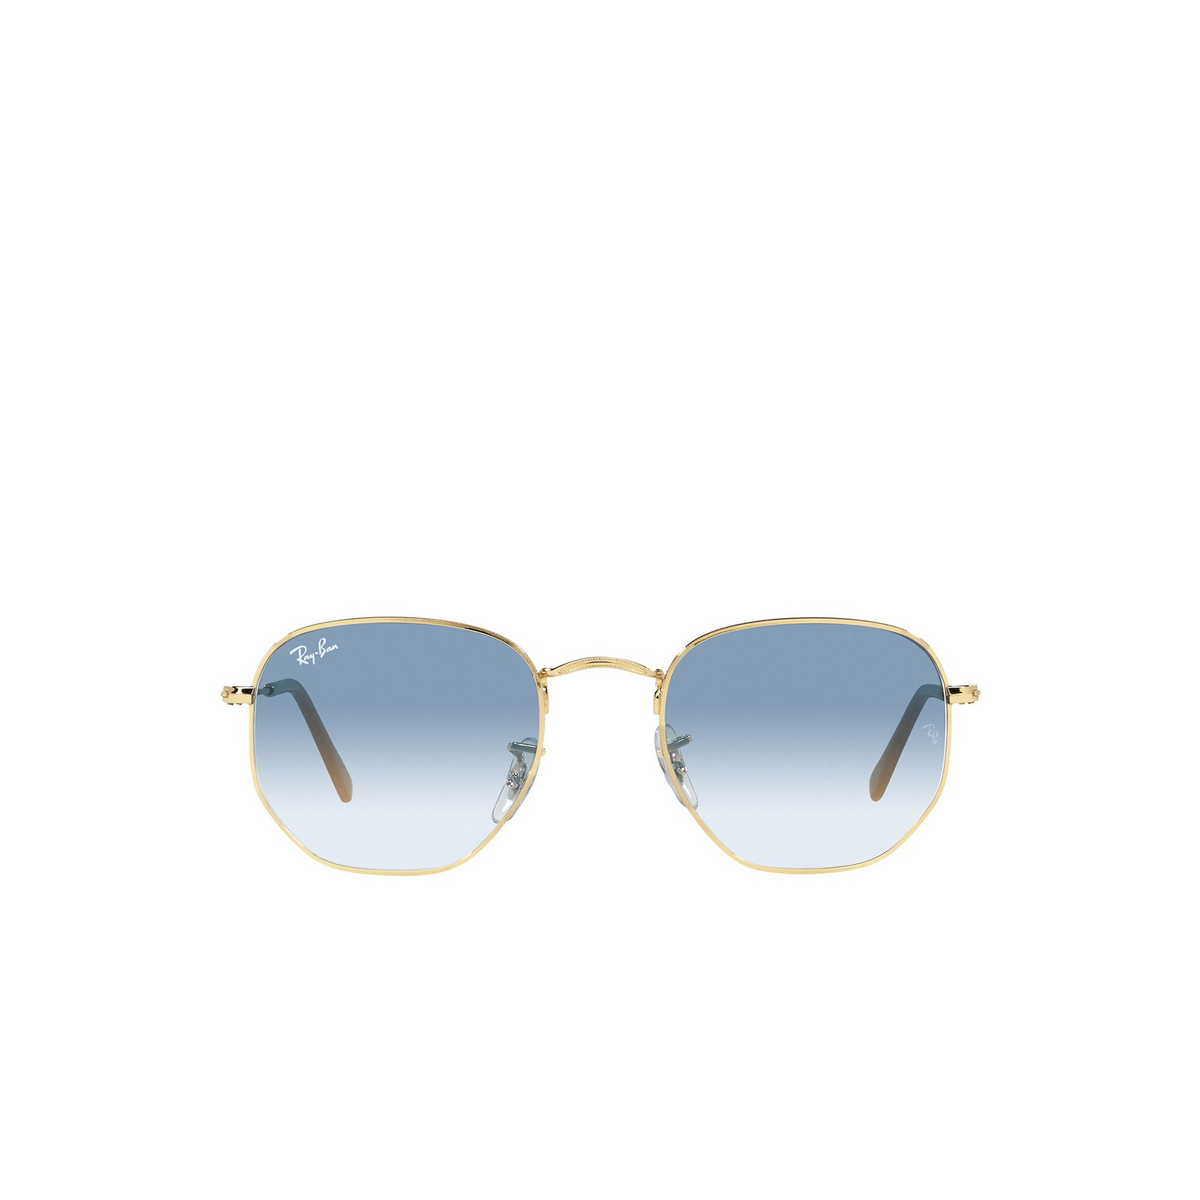 Ray-Ban RB3548 Sunglasses 001/3F Arista - front view